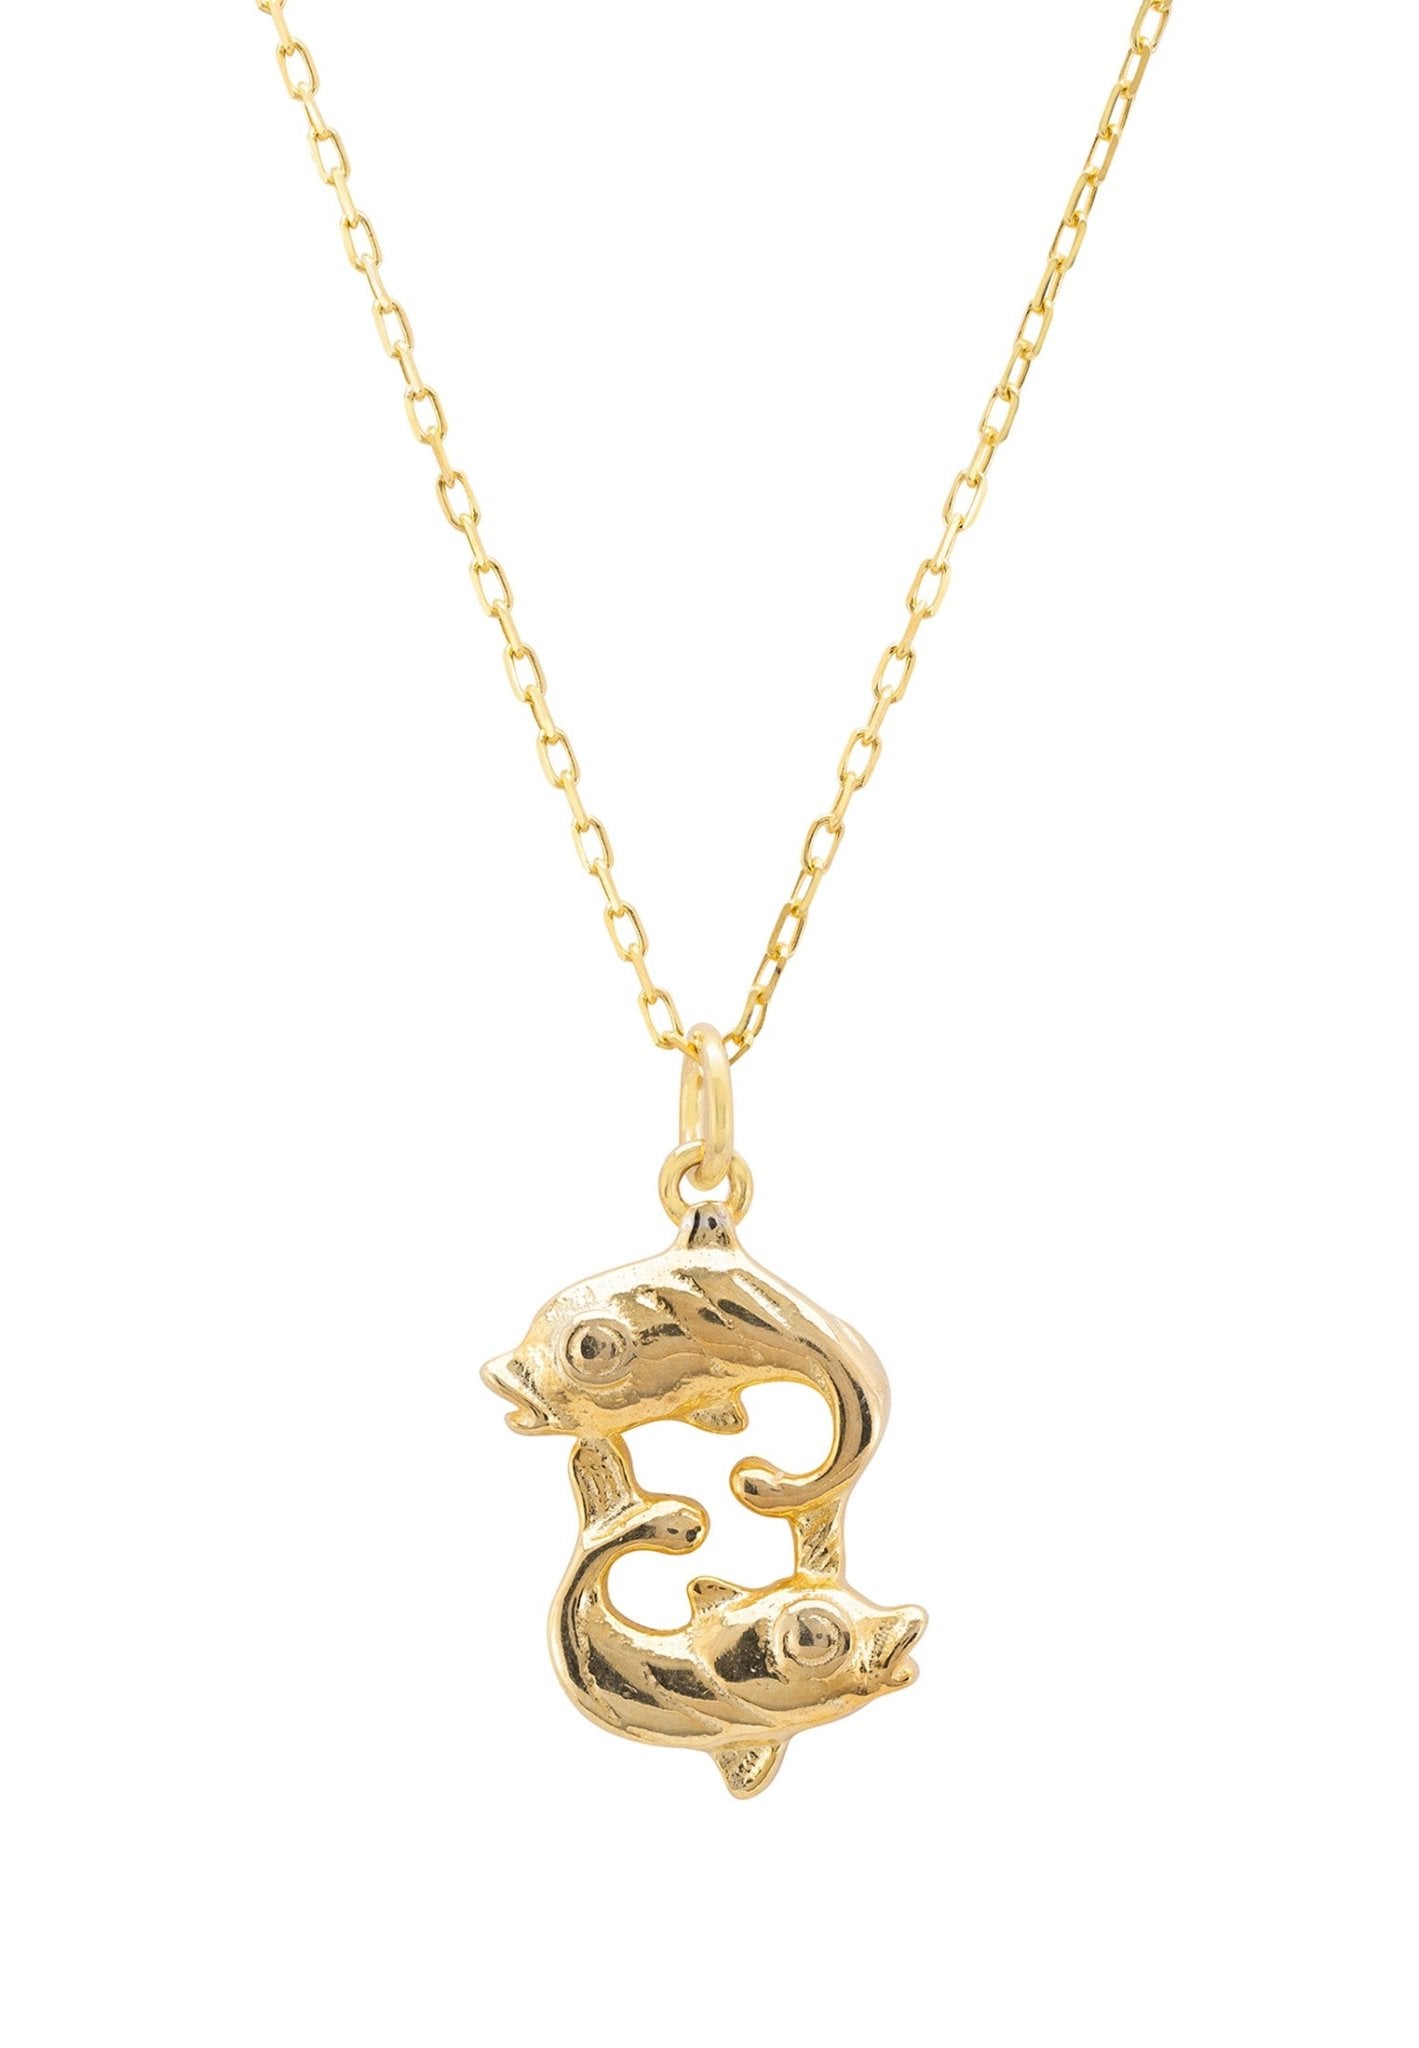 Personalized Necklaces - Zodiac Star Sign Necklace Gold Pisces 